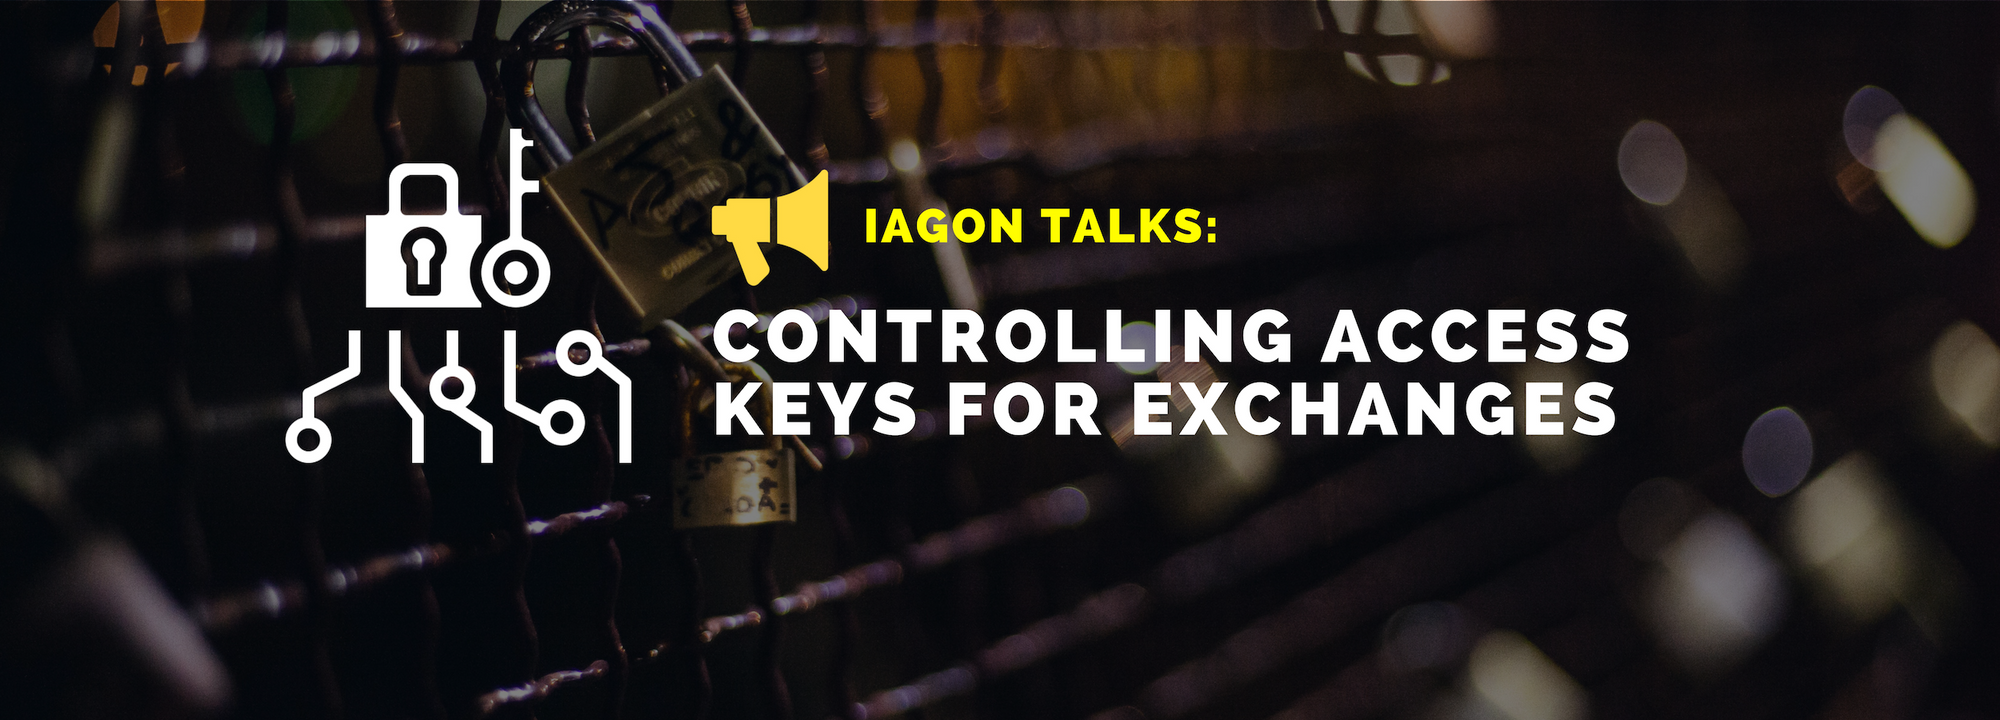 IAGON Talks: Controlling Access Keys for Exchanges